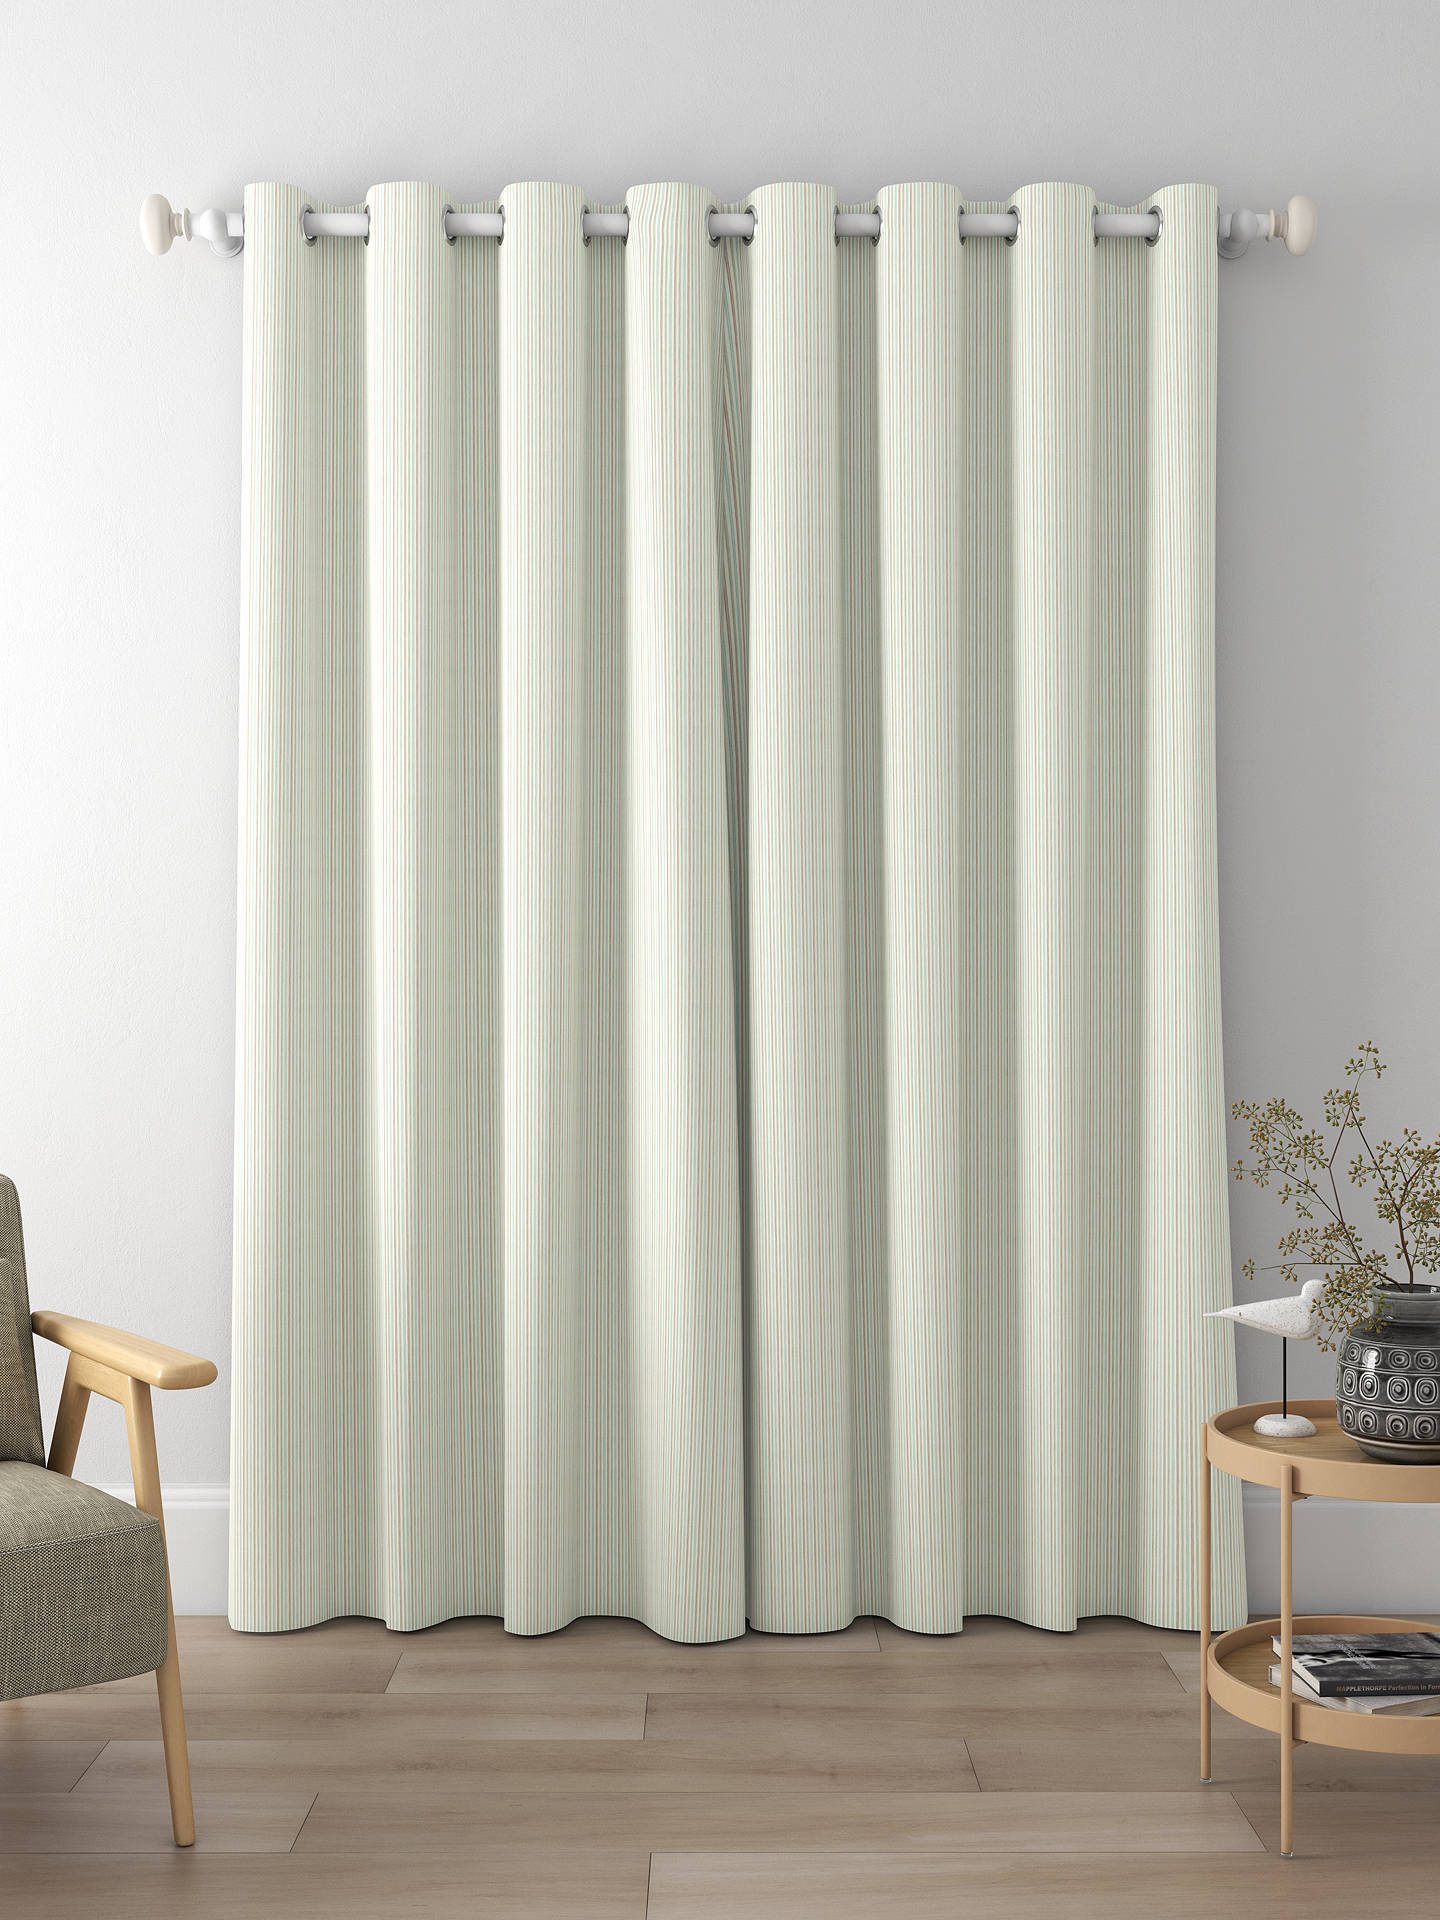 Sanderson Melford Made to Measure Curtains, Multi